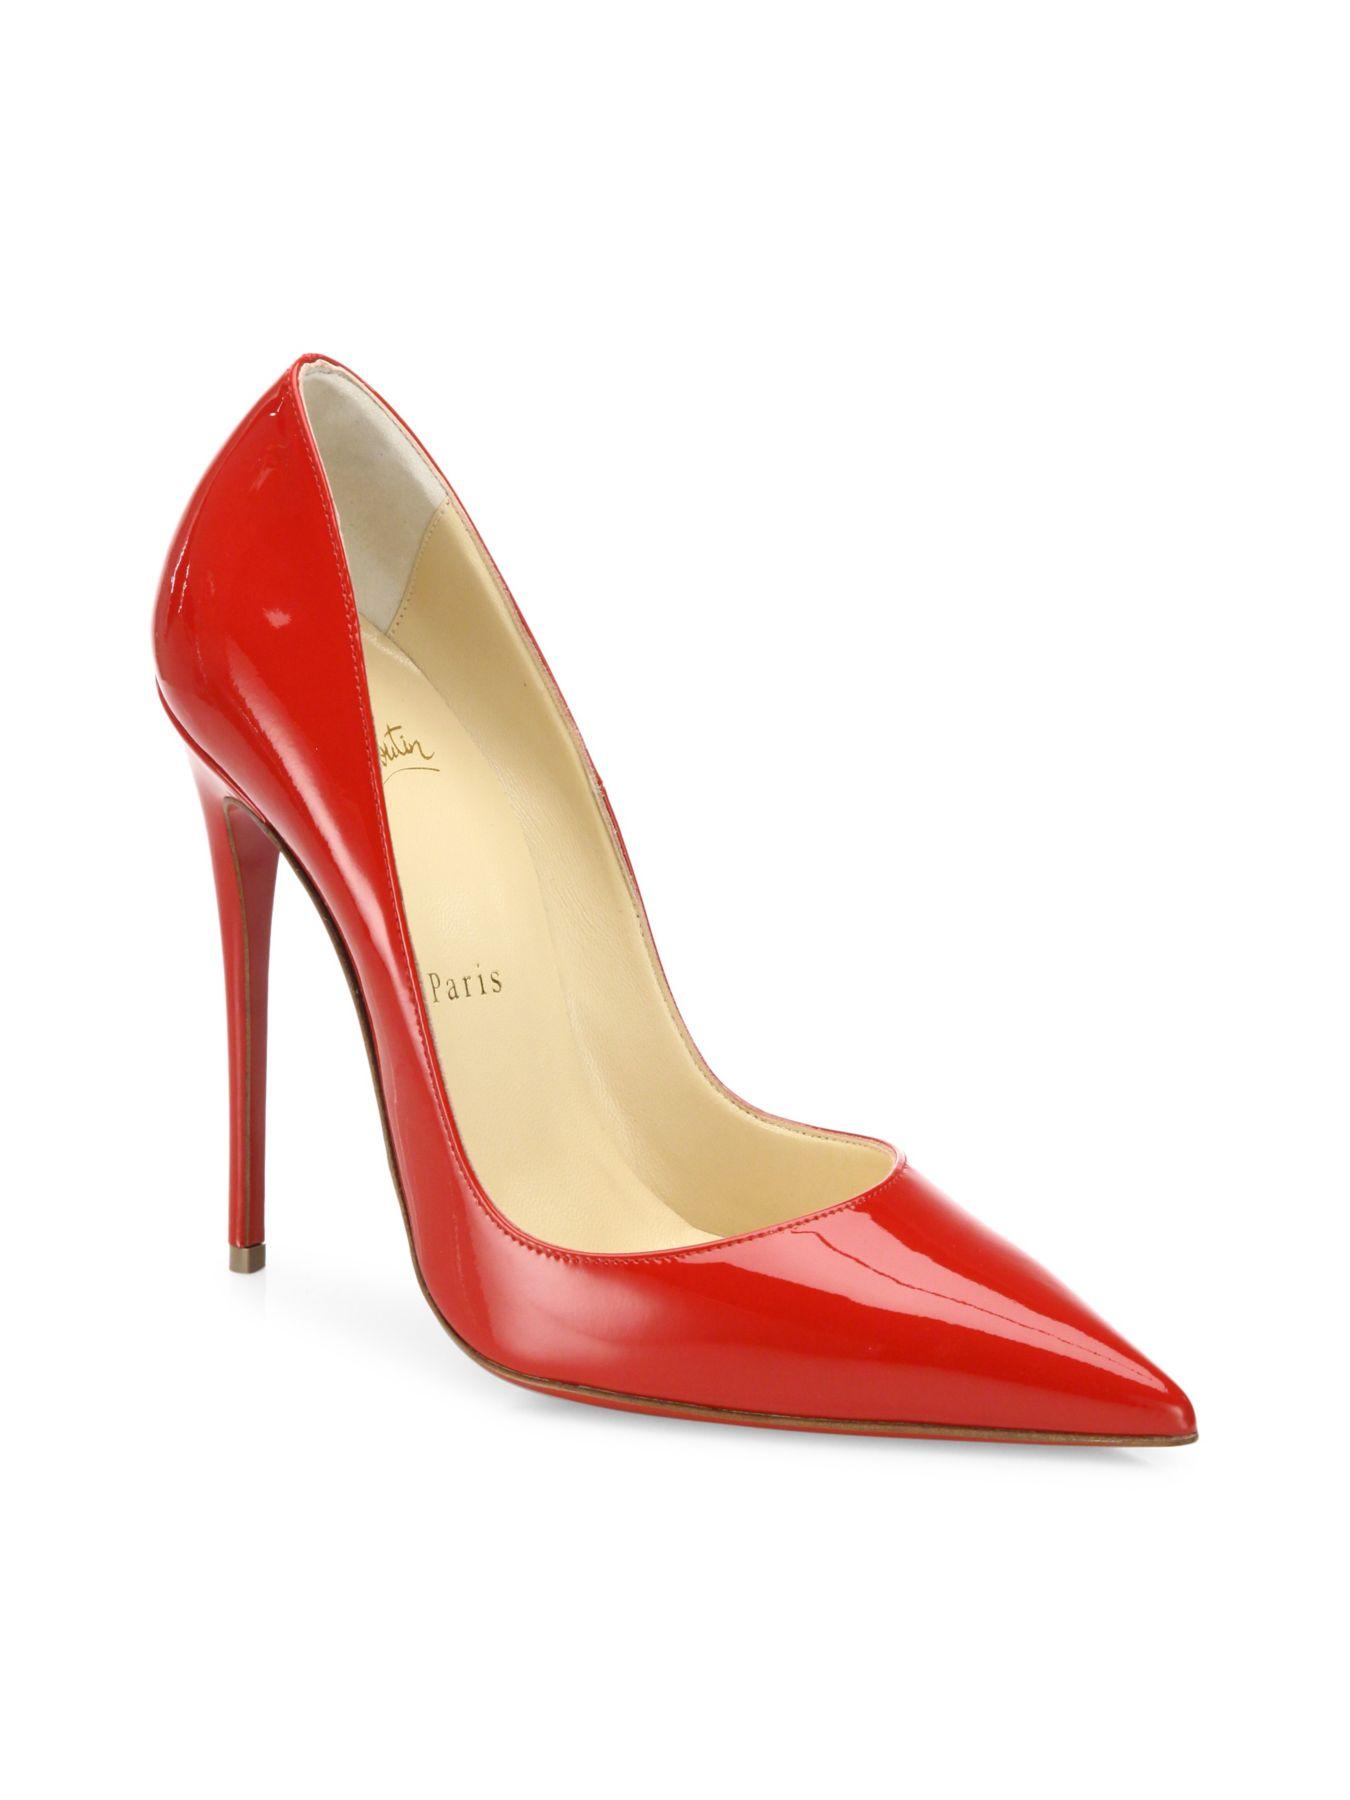 Christian Louboutin So Kate 120 Patent Leather Pumps in Red - Lyst